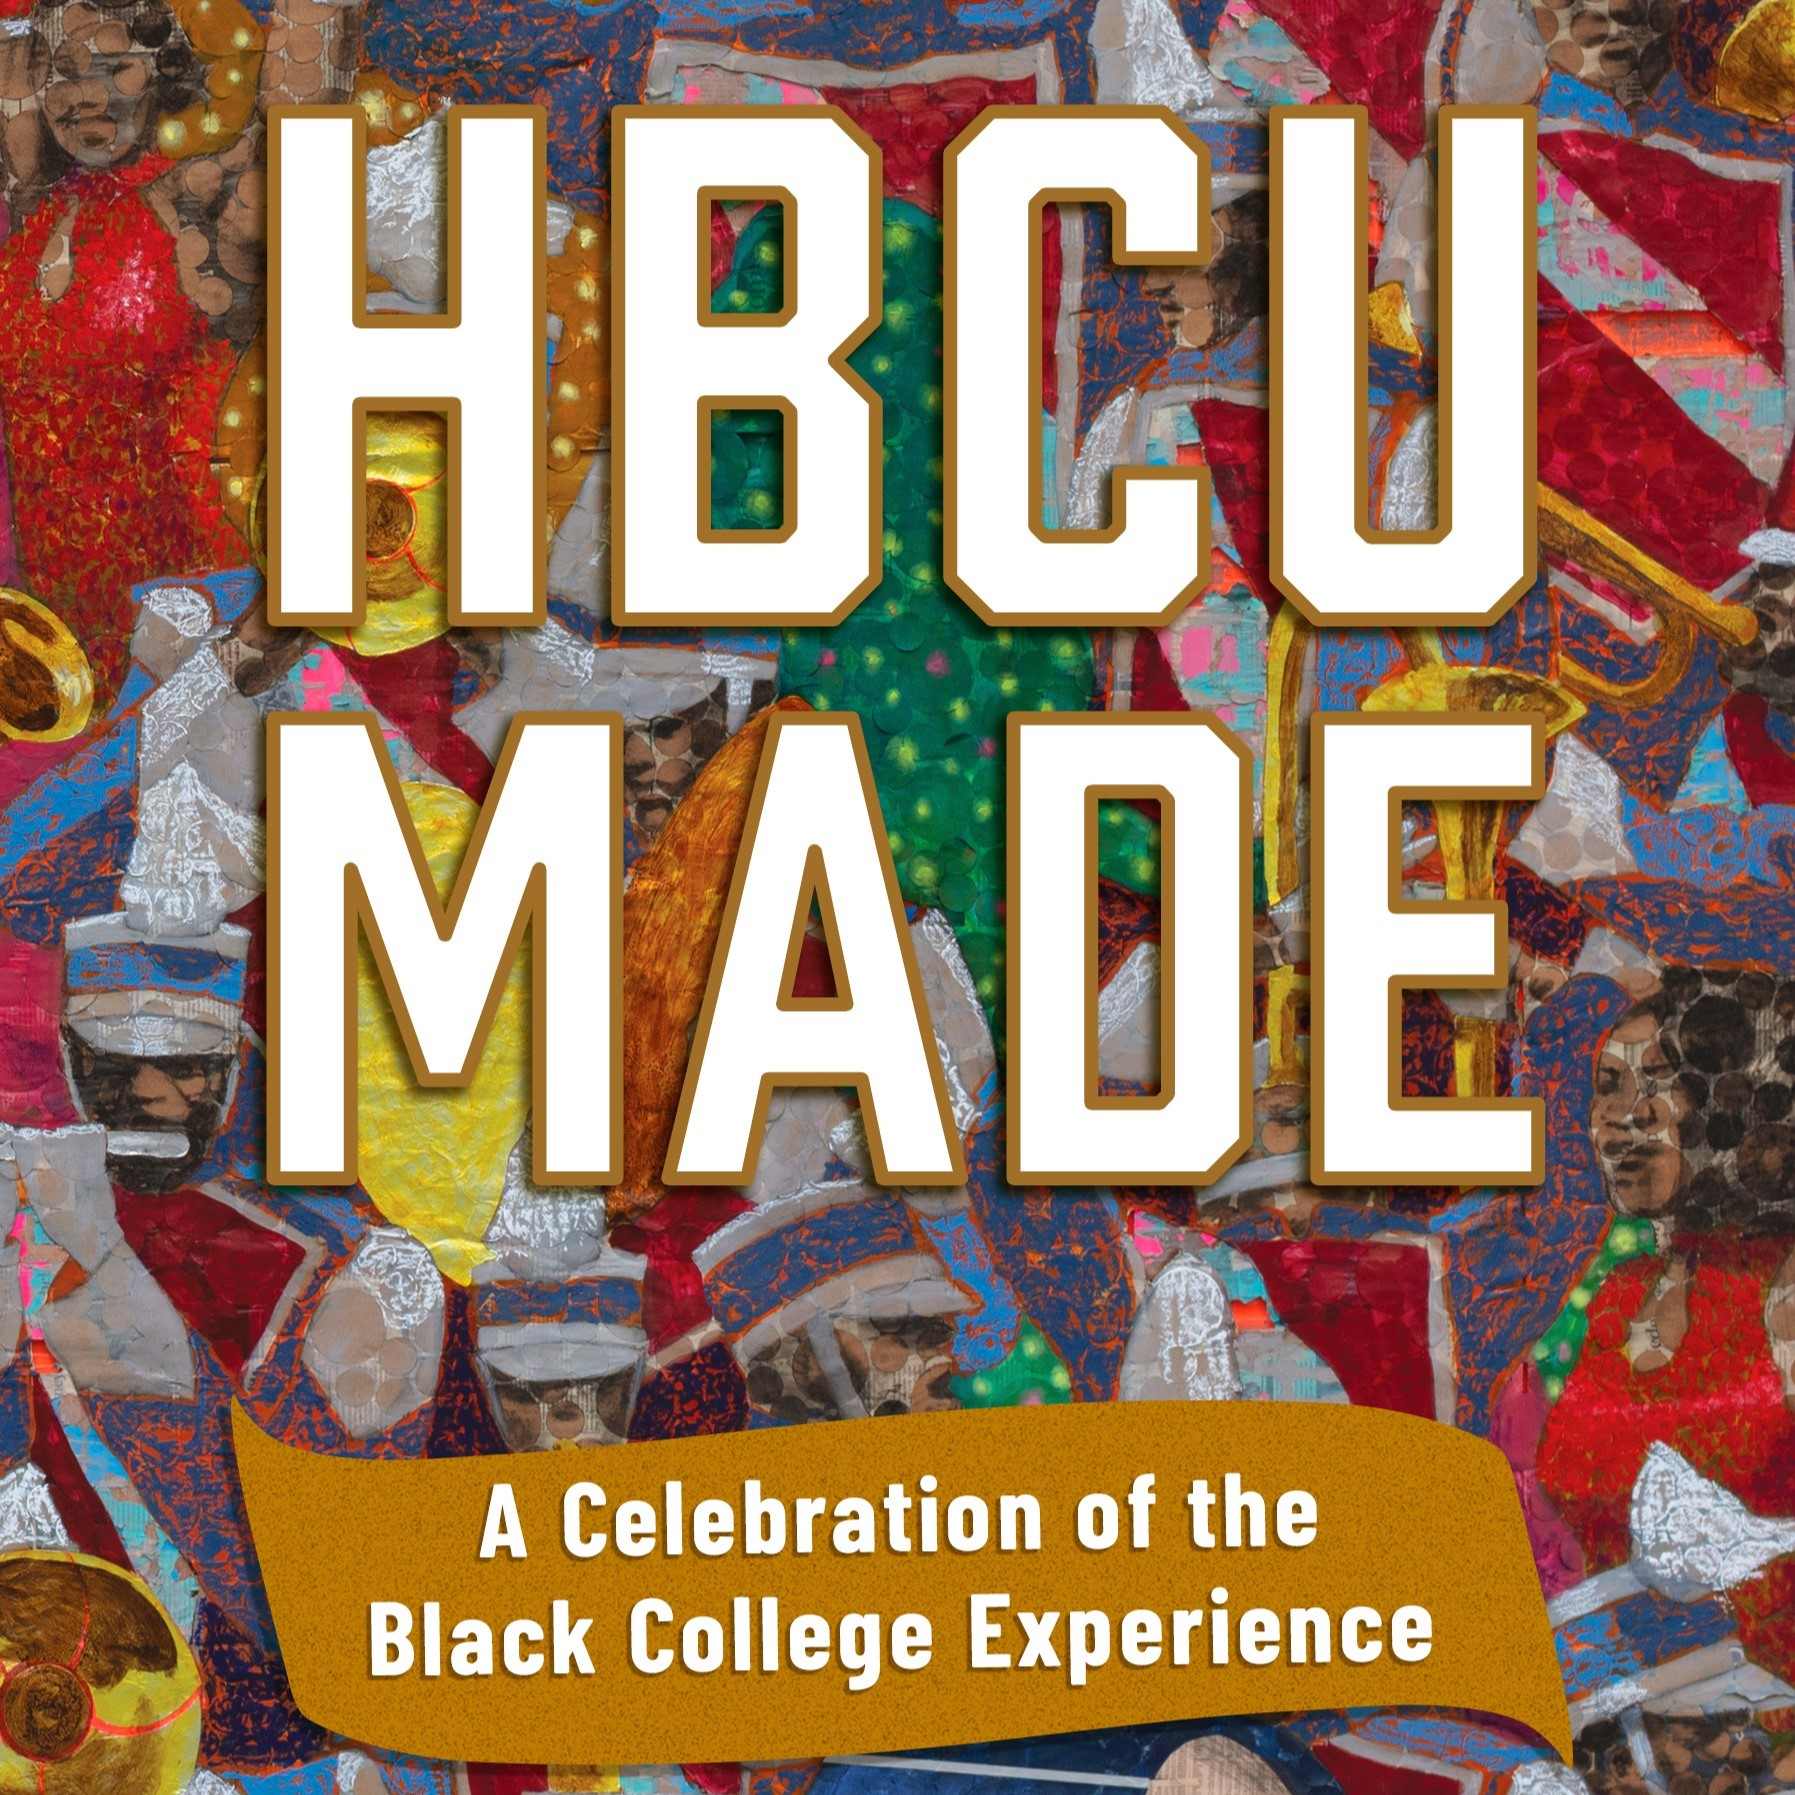 Essays tell why HBCUs make a difference